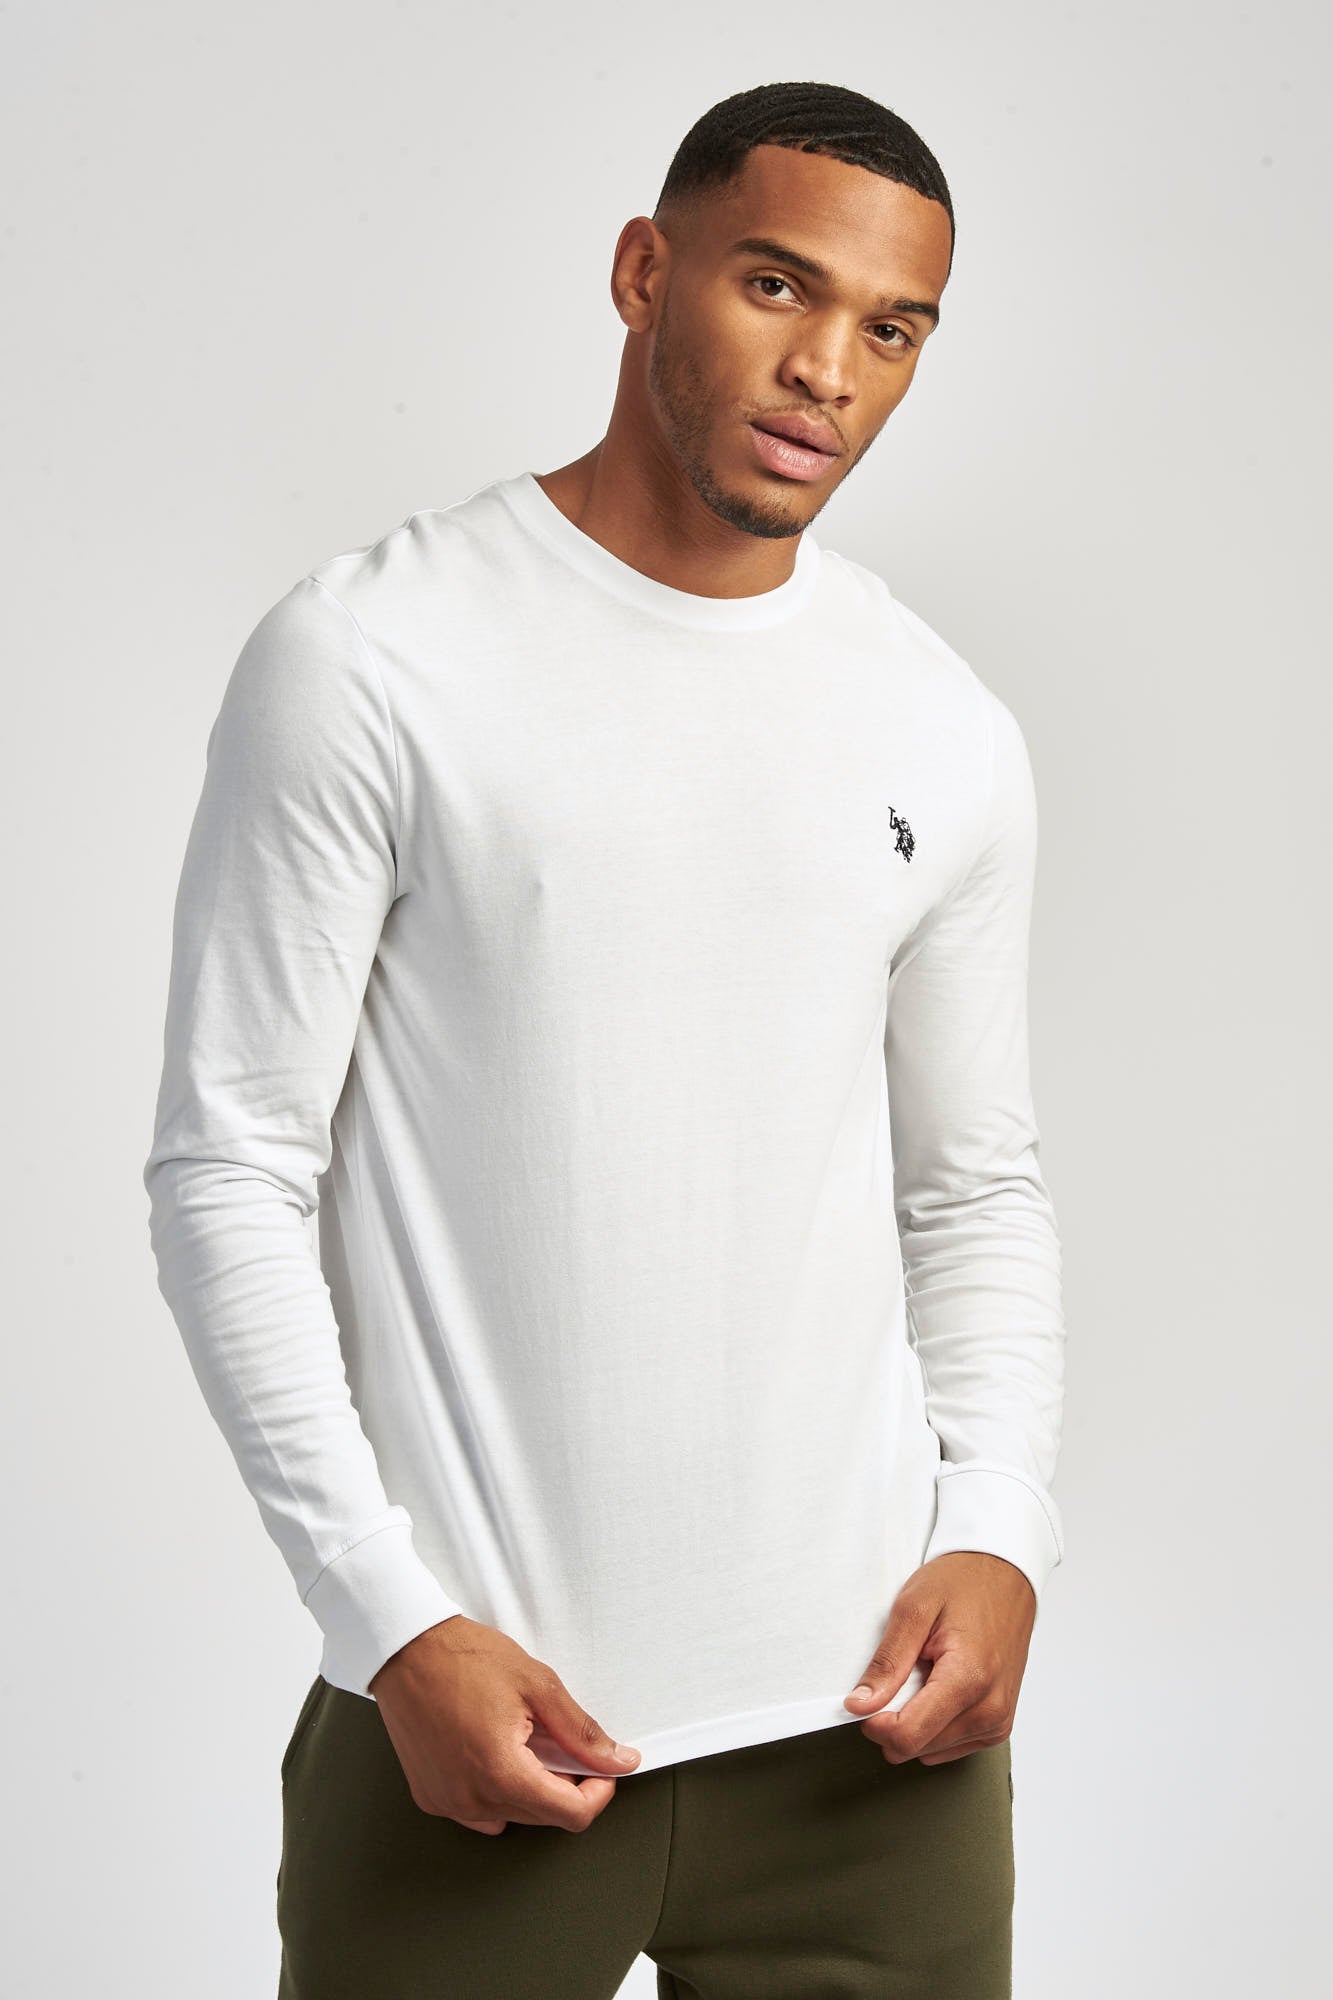 Mens Long Sleeved T-Shirt in Bright White